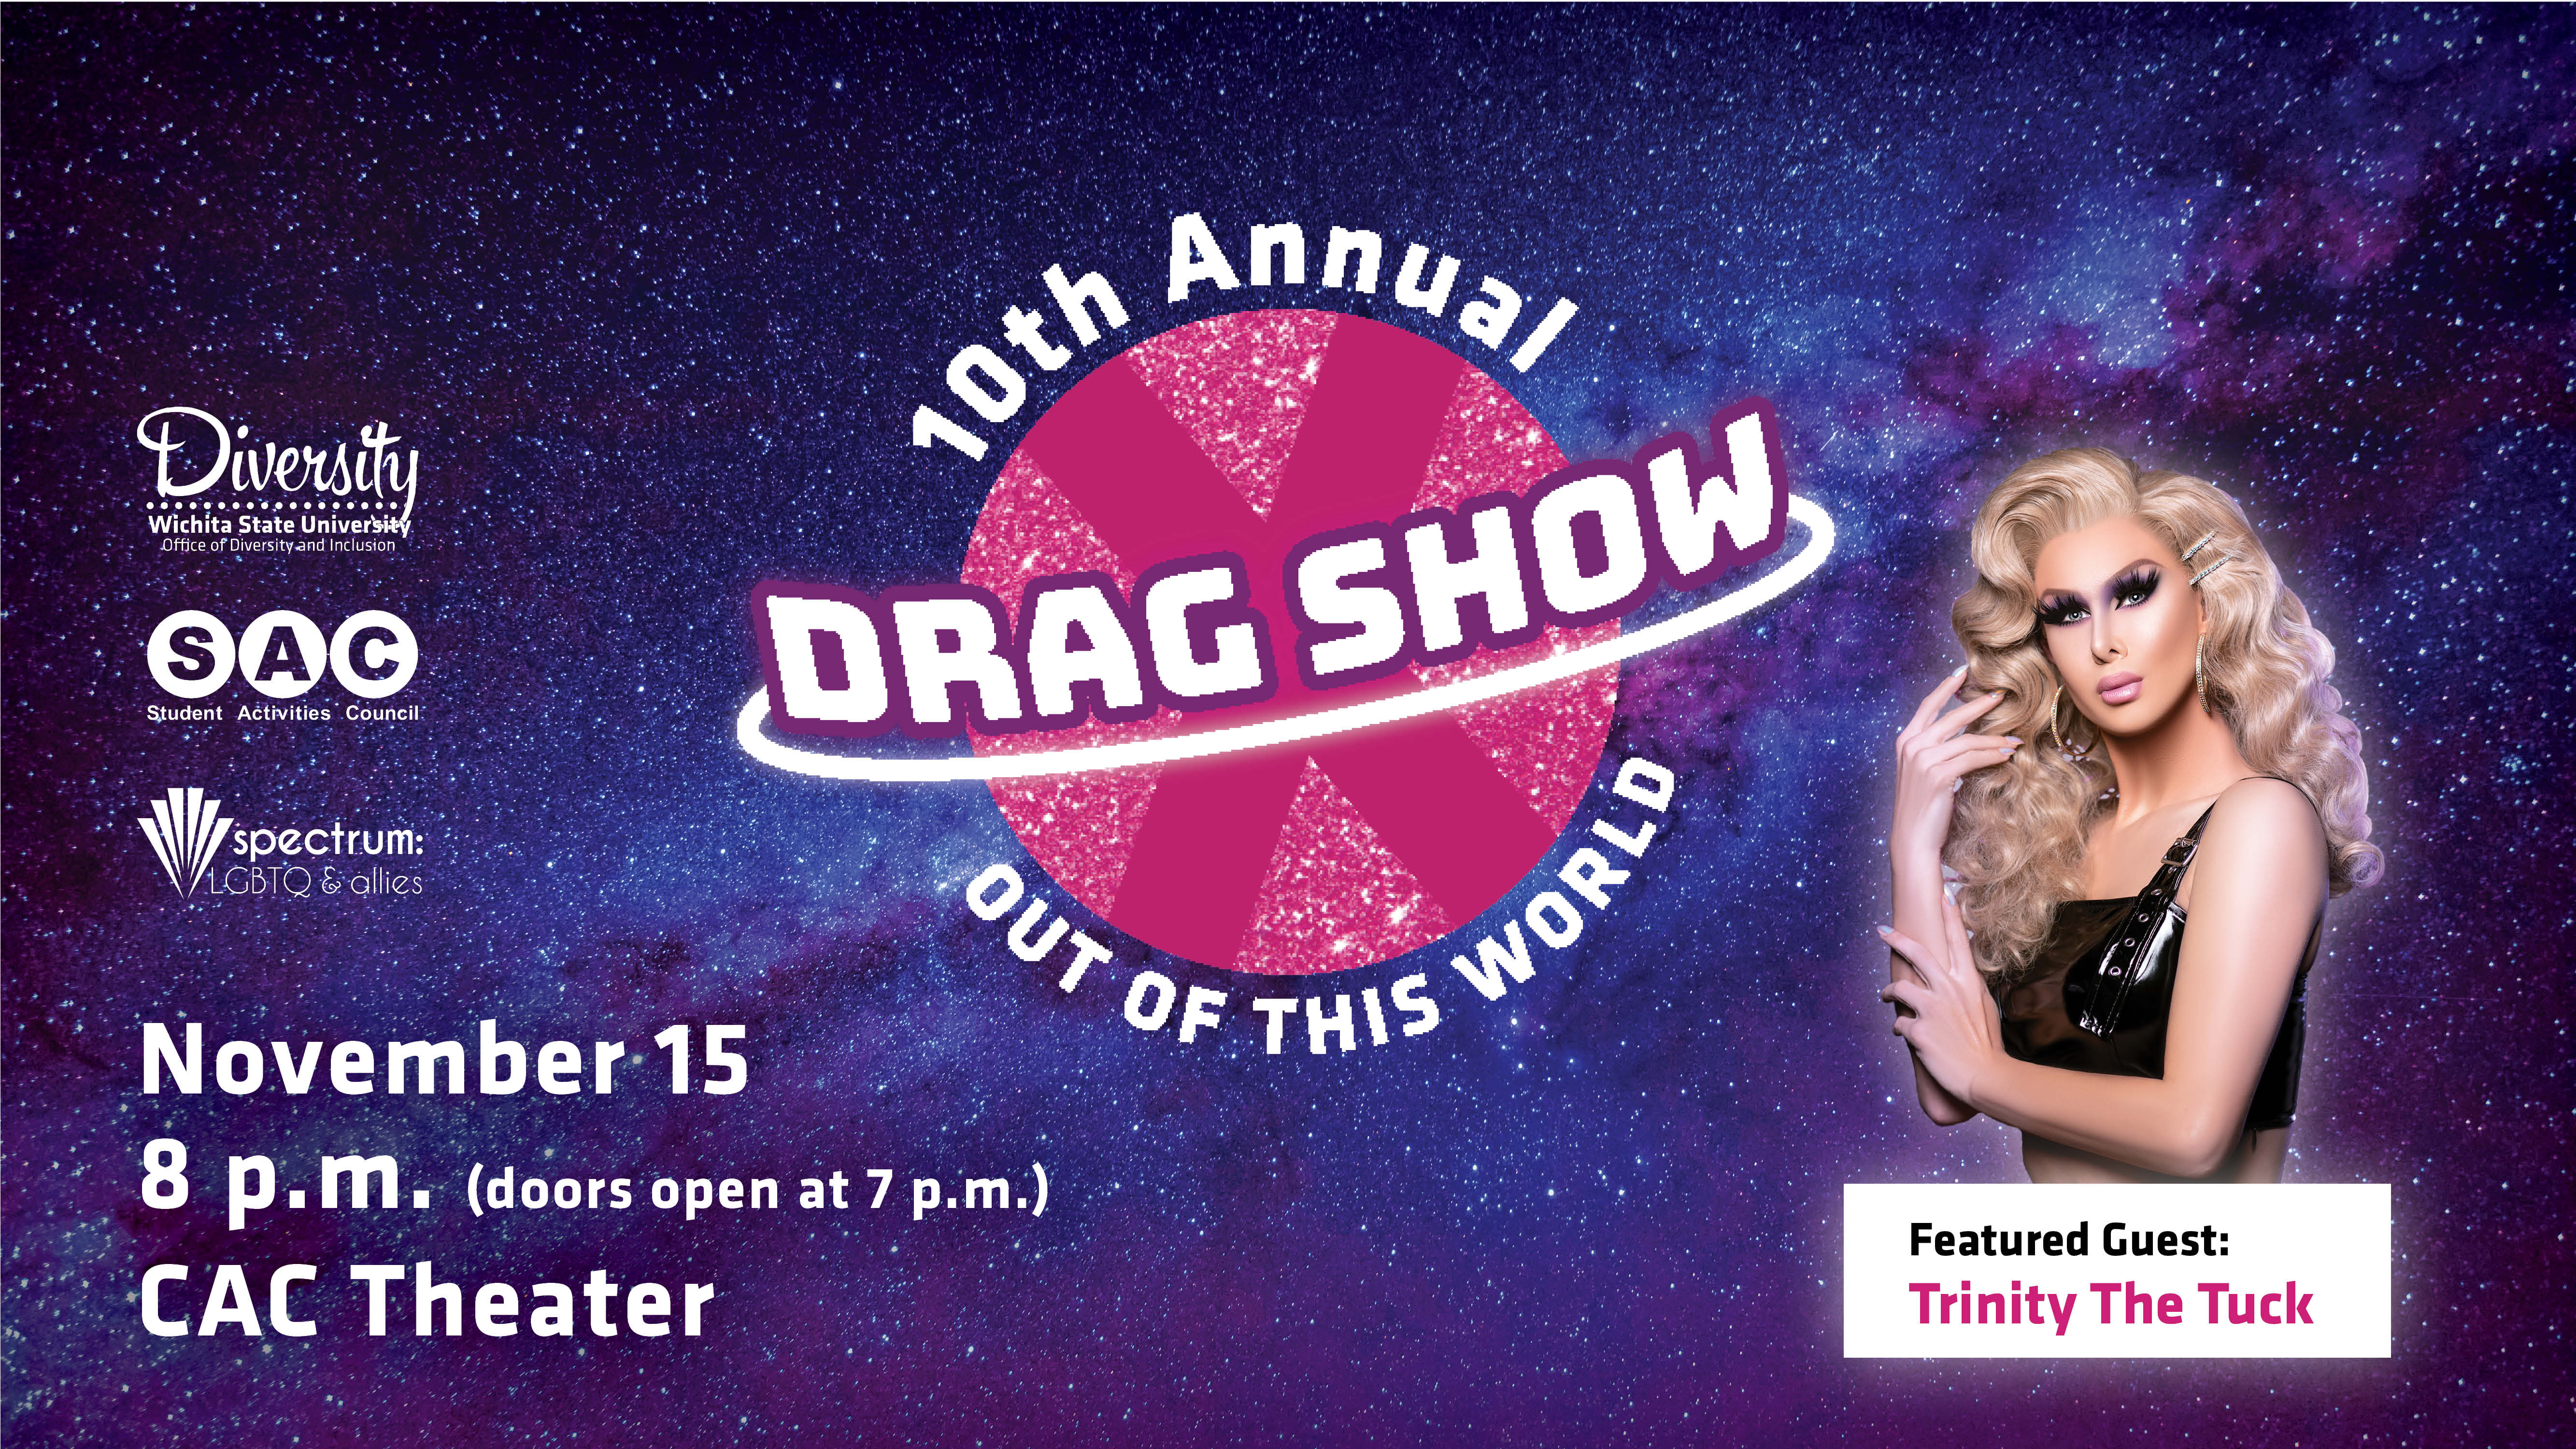 See the 10th Annual Drag Show featuring Trinity the Tuck